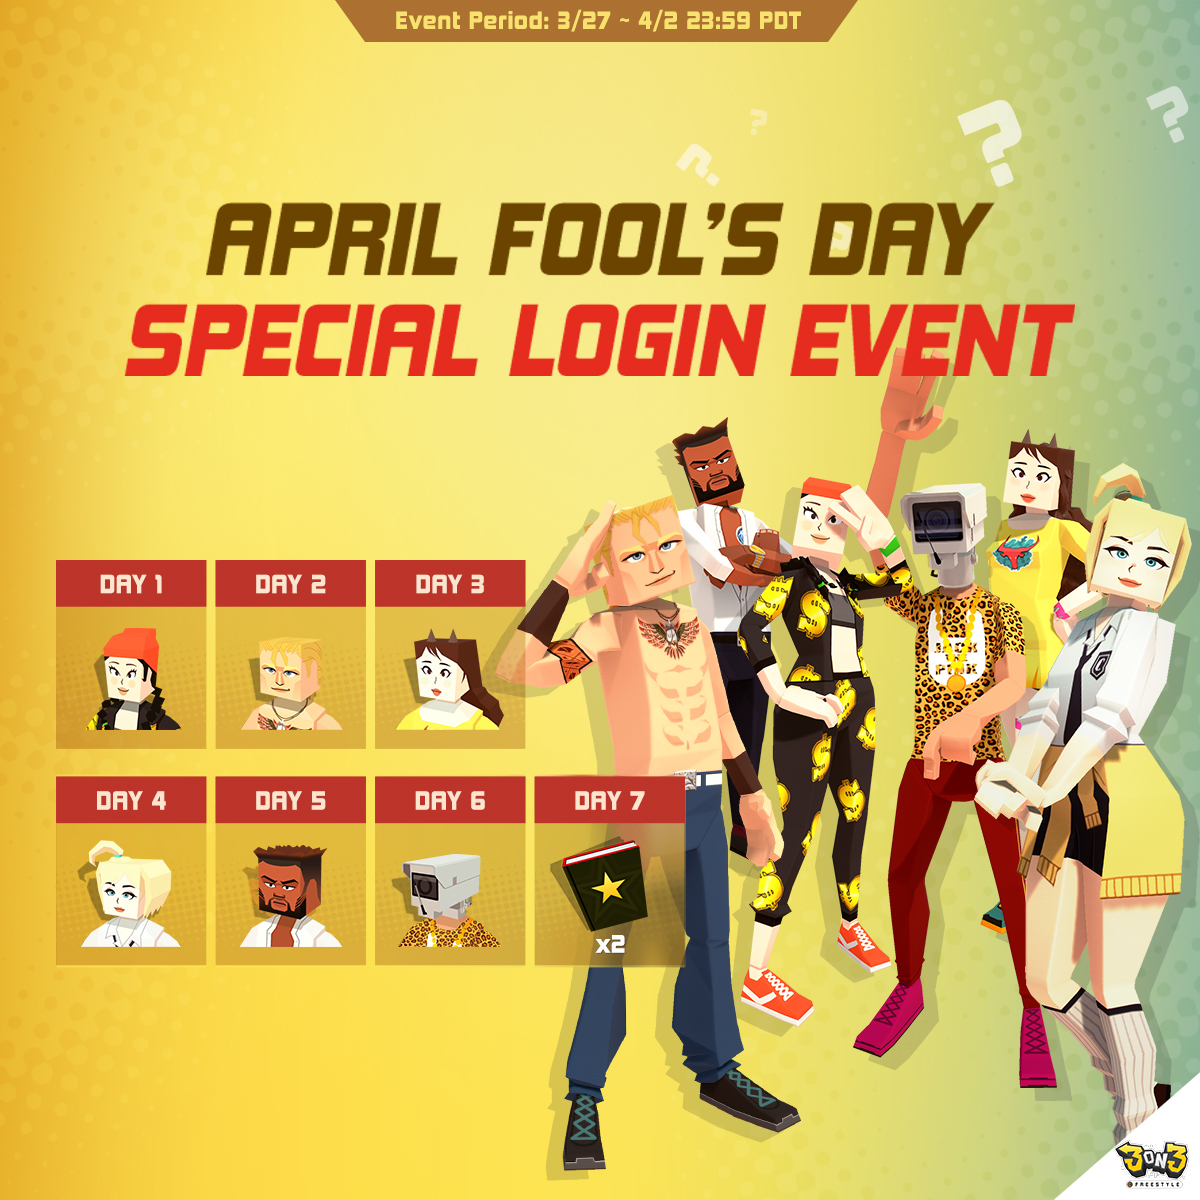 Get ready to celebrate April Fool's Day in style with 3on3 Freestyle! Join us from March 27 to April 2 for our special login event and claim your special outfit! 🤩 Let's add some laughter and fun to the courts #videogame #StreetBasketball #3on3freestyle